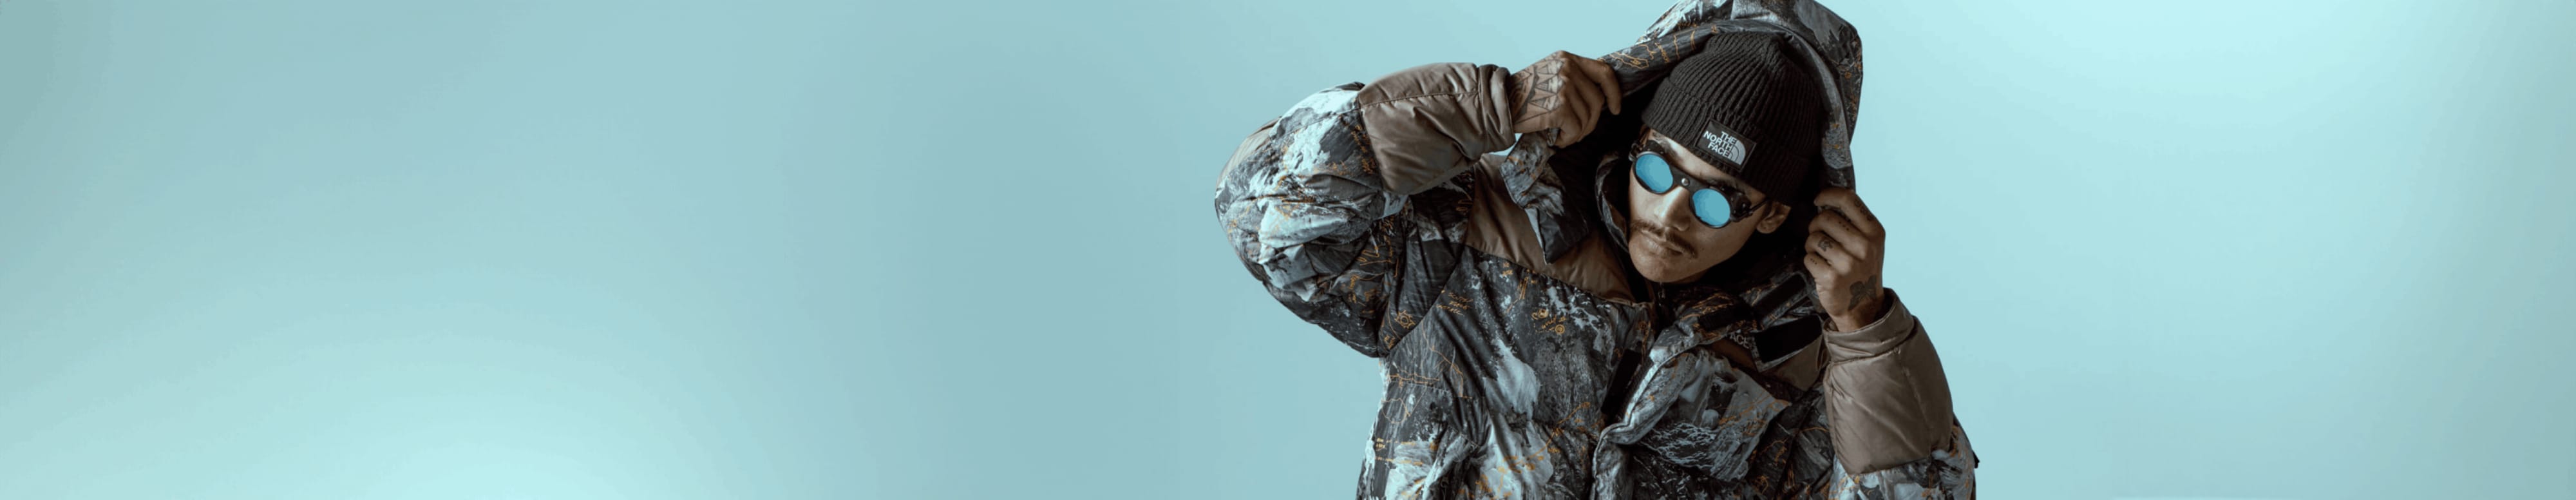 A person wearing the HMLYN Baltoro Jacket from Conrad Anker Notes Collection adjusts the hood in front of a blue background.